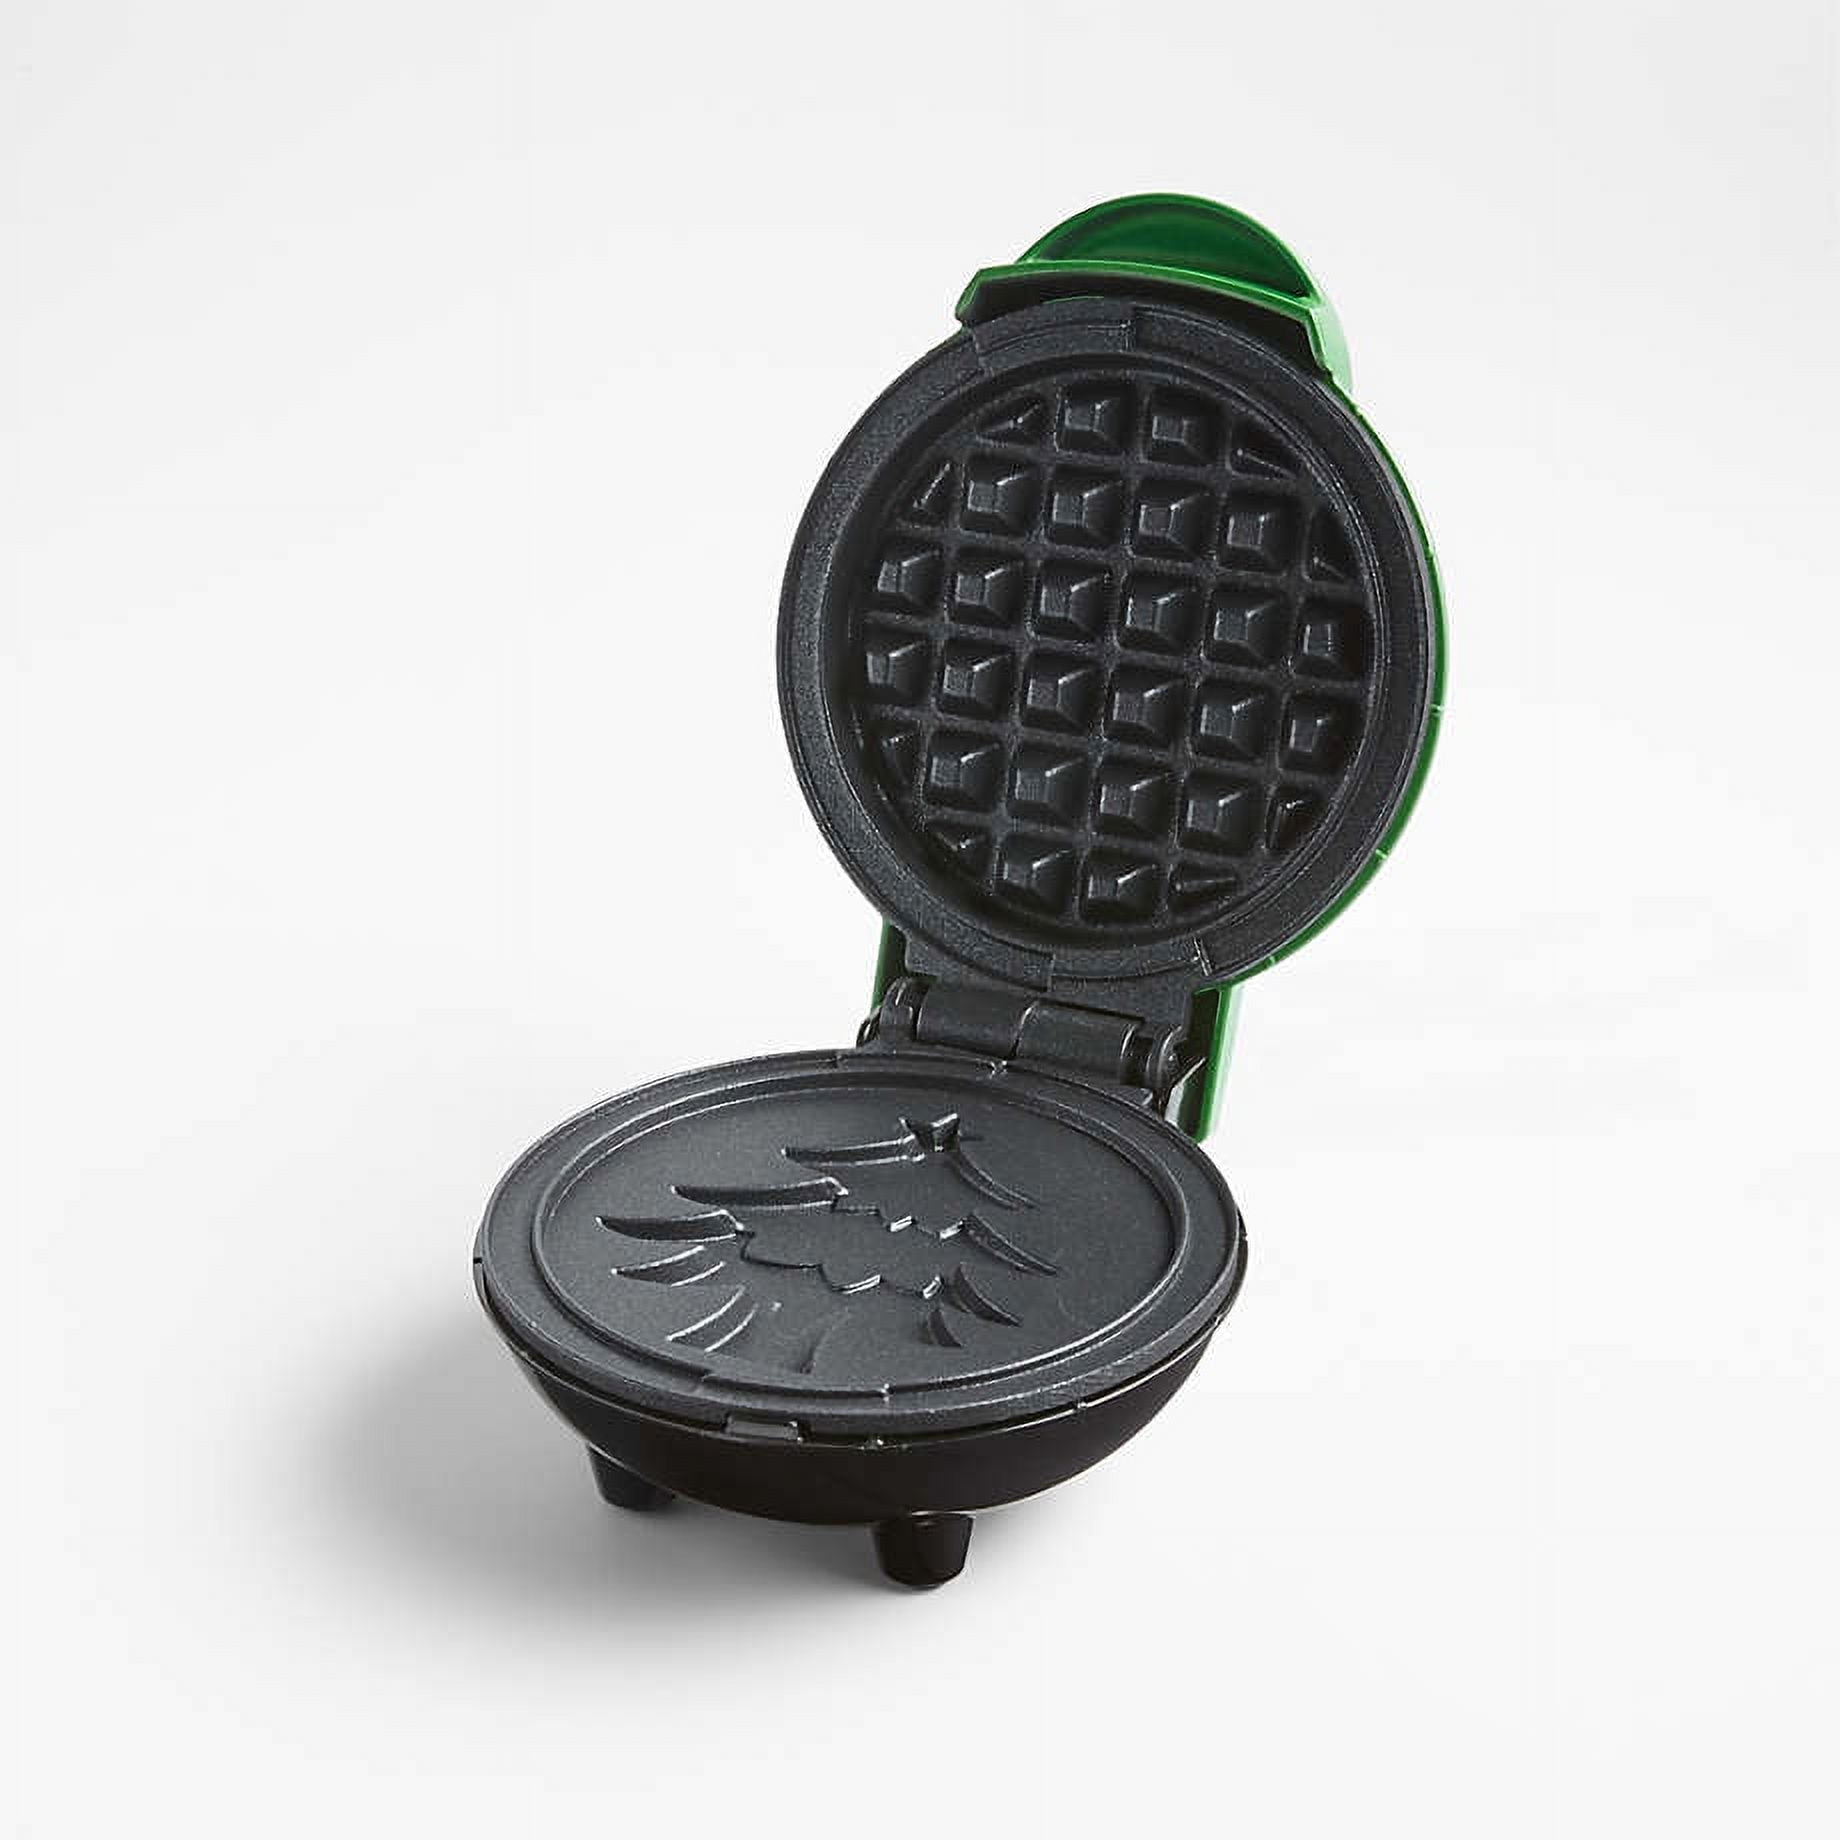 Dash Holiday Christmas Trees Mini Waffle Maker for sale online